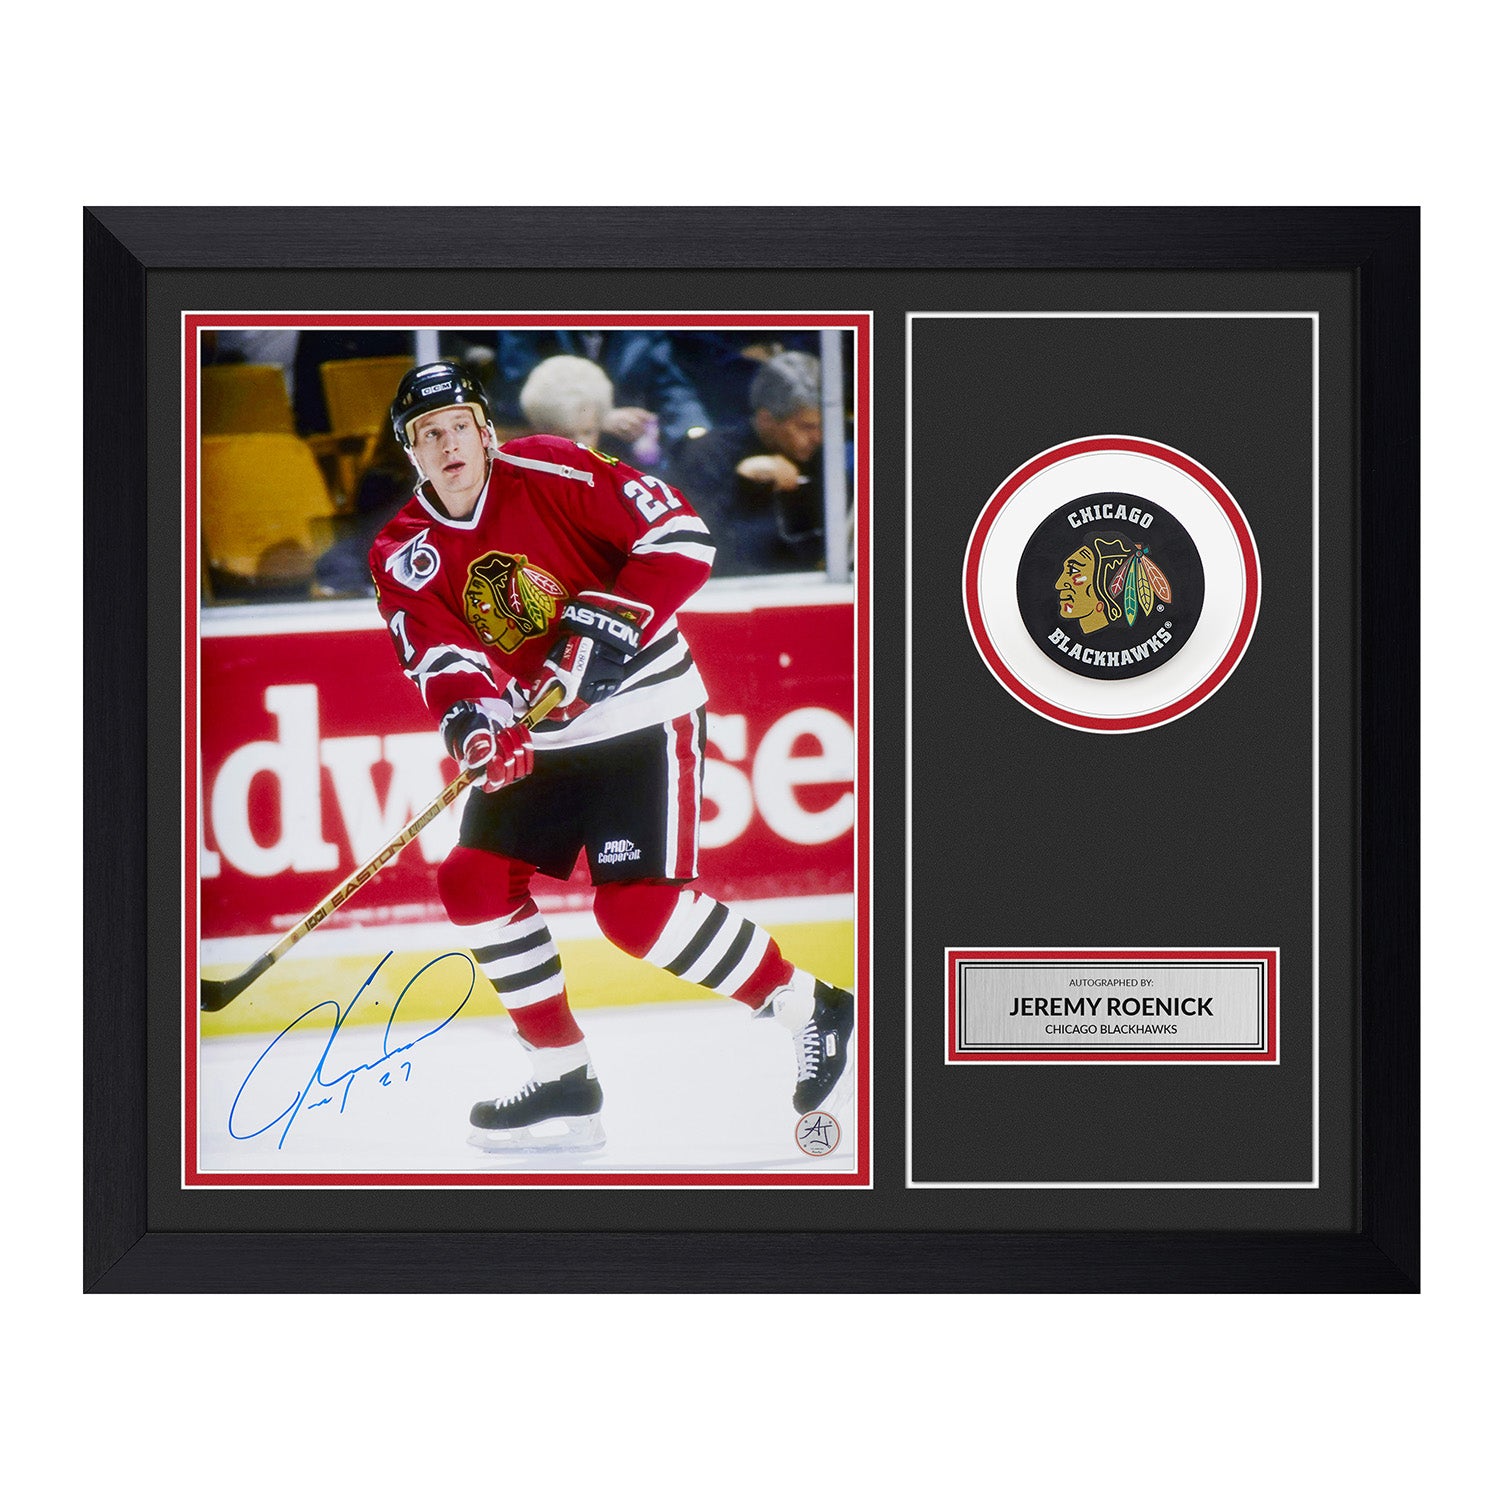 Jeremy Roenick Signed Chicago Blackhawks Puck Display 19x23 Frame